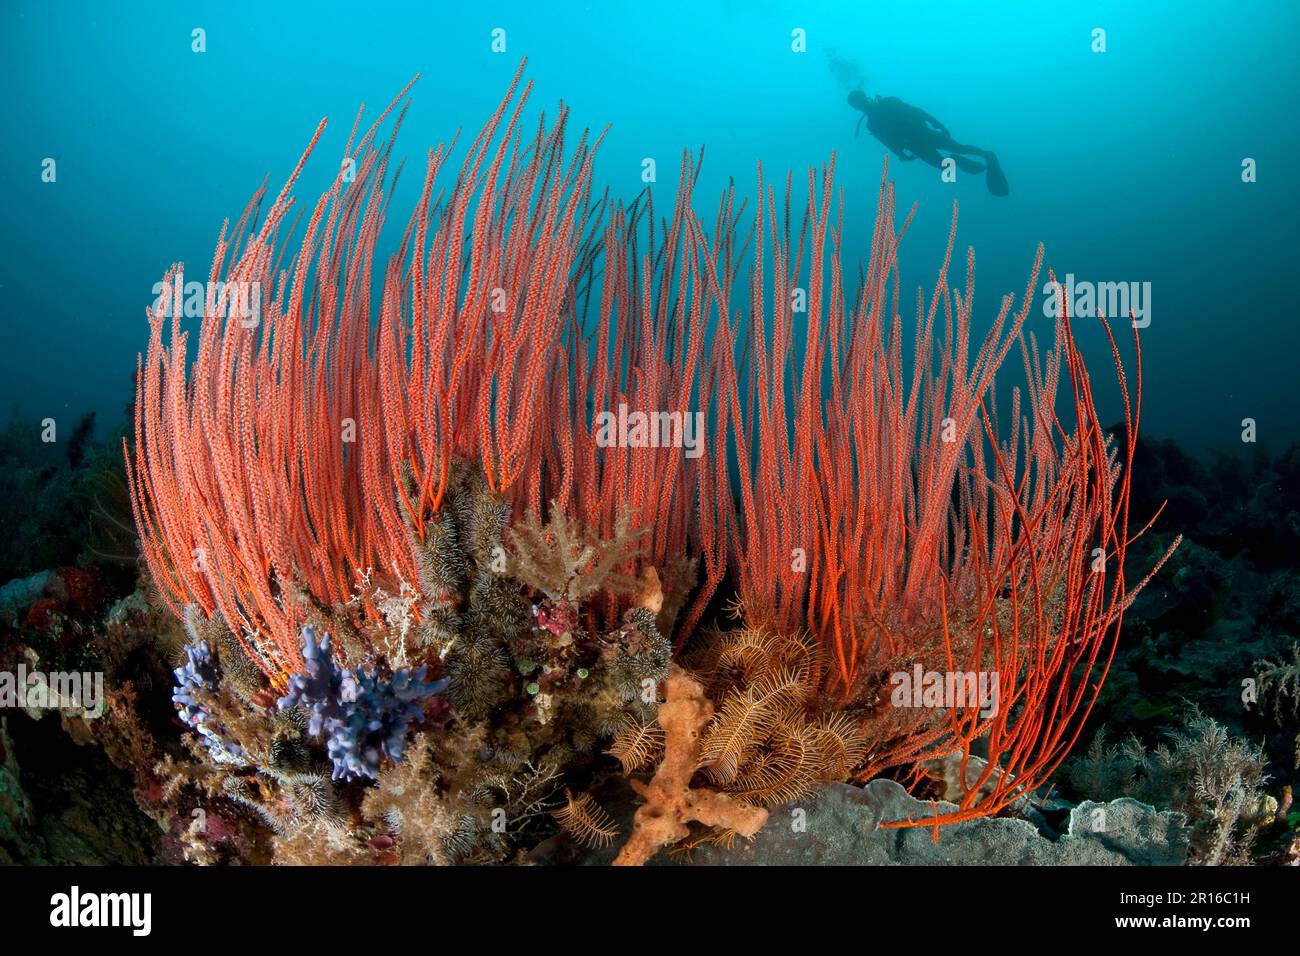 Red whip coral (Ellisella ceratophyta), red bush gorgonian and diver, Moluccas, Pacific Ocean, Indonesia Stock Photo